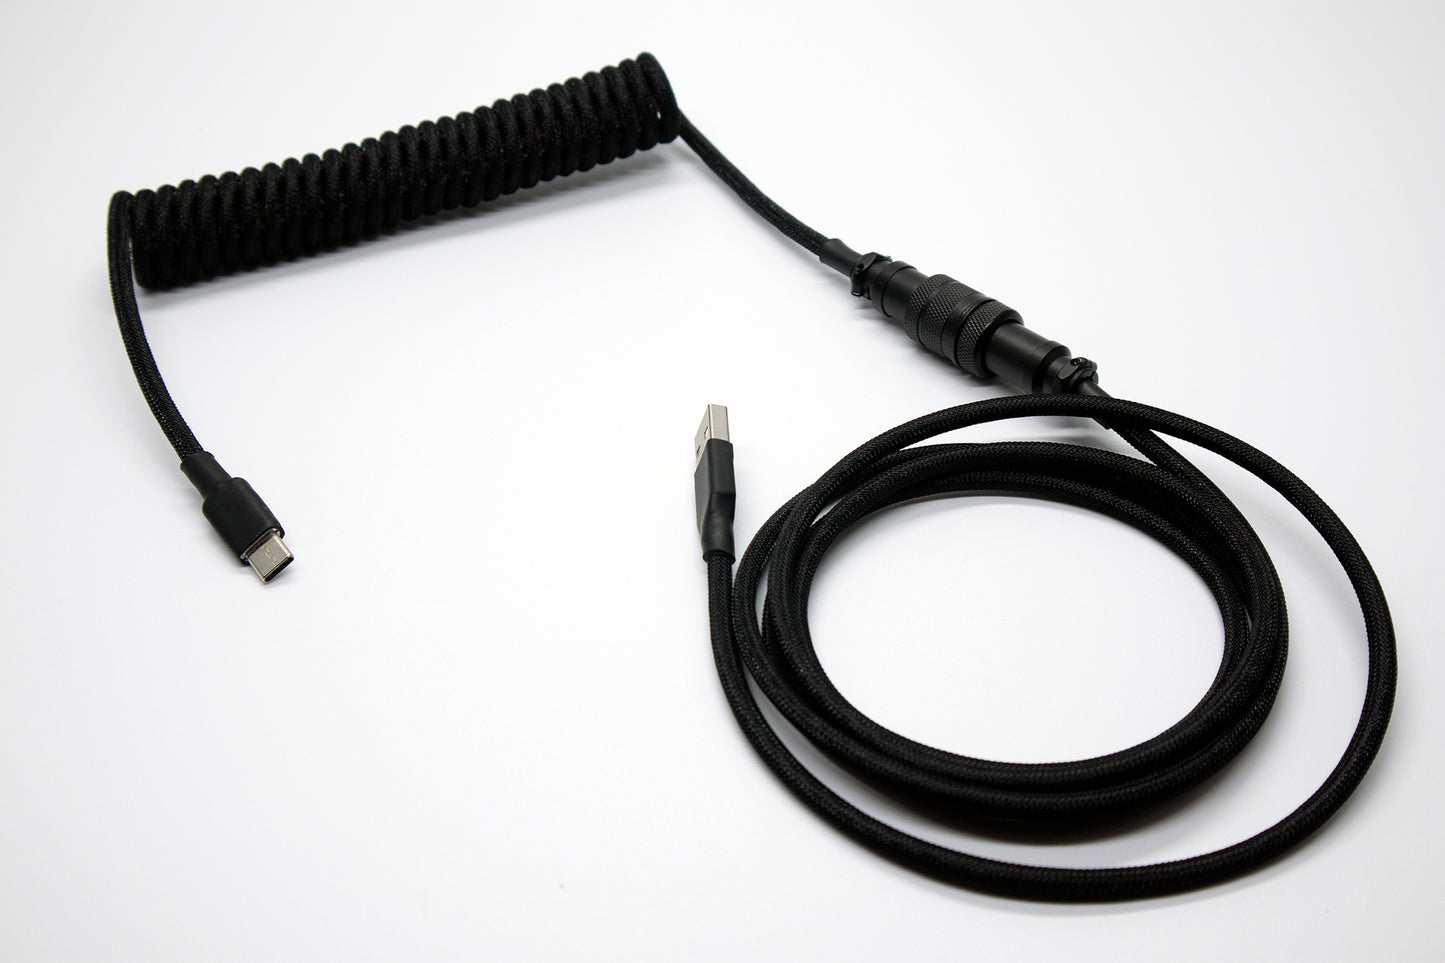 Blackout Coiled Aviator Custom Double Sleeved USB Cables – Upgrade Keyboards